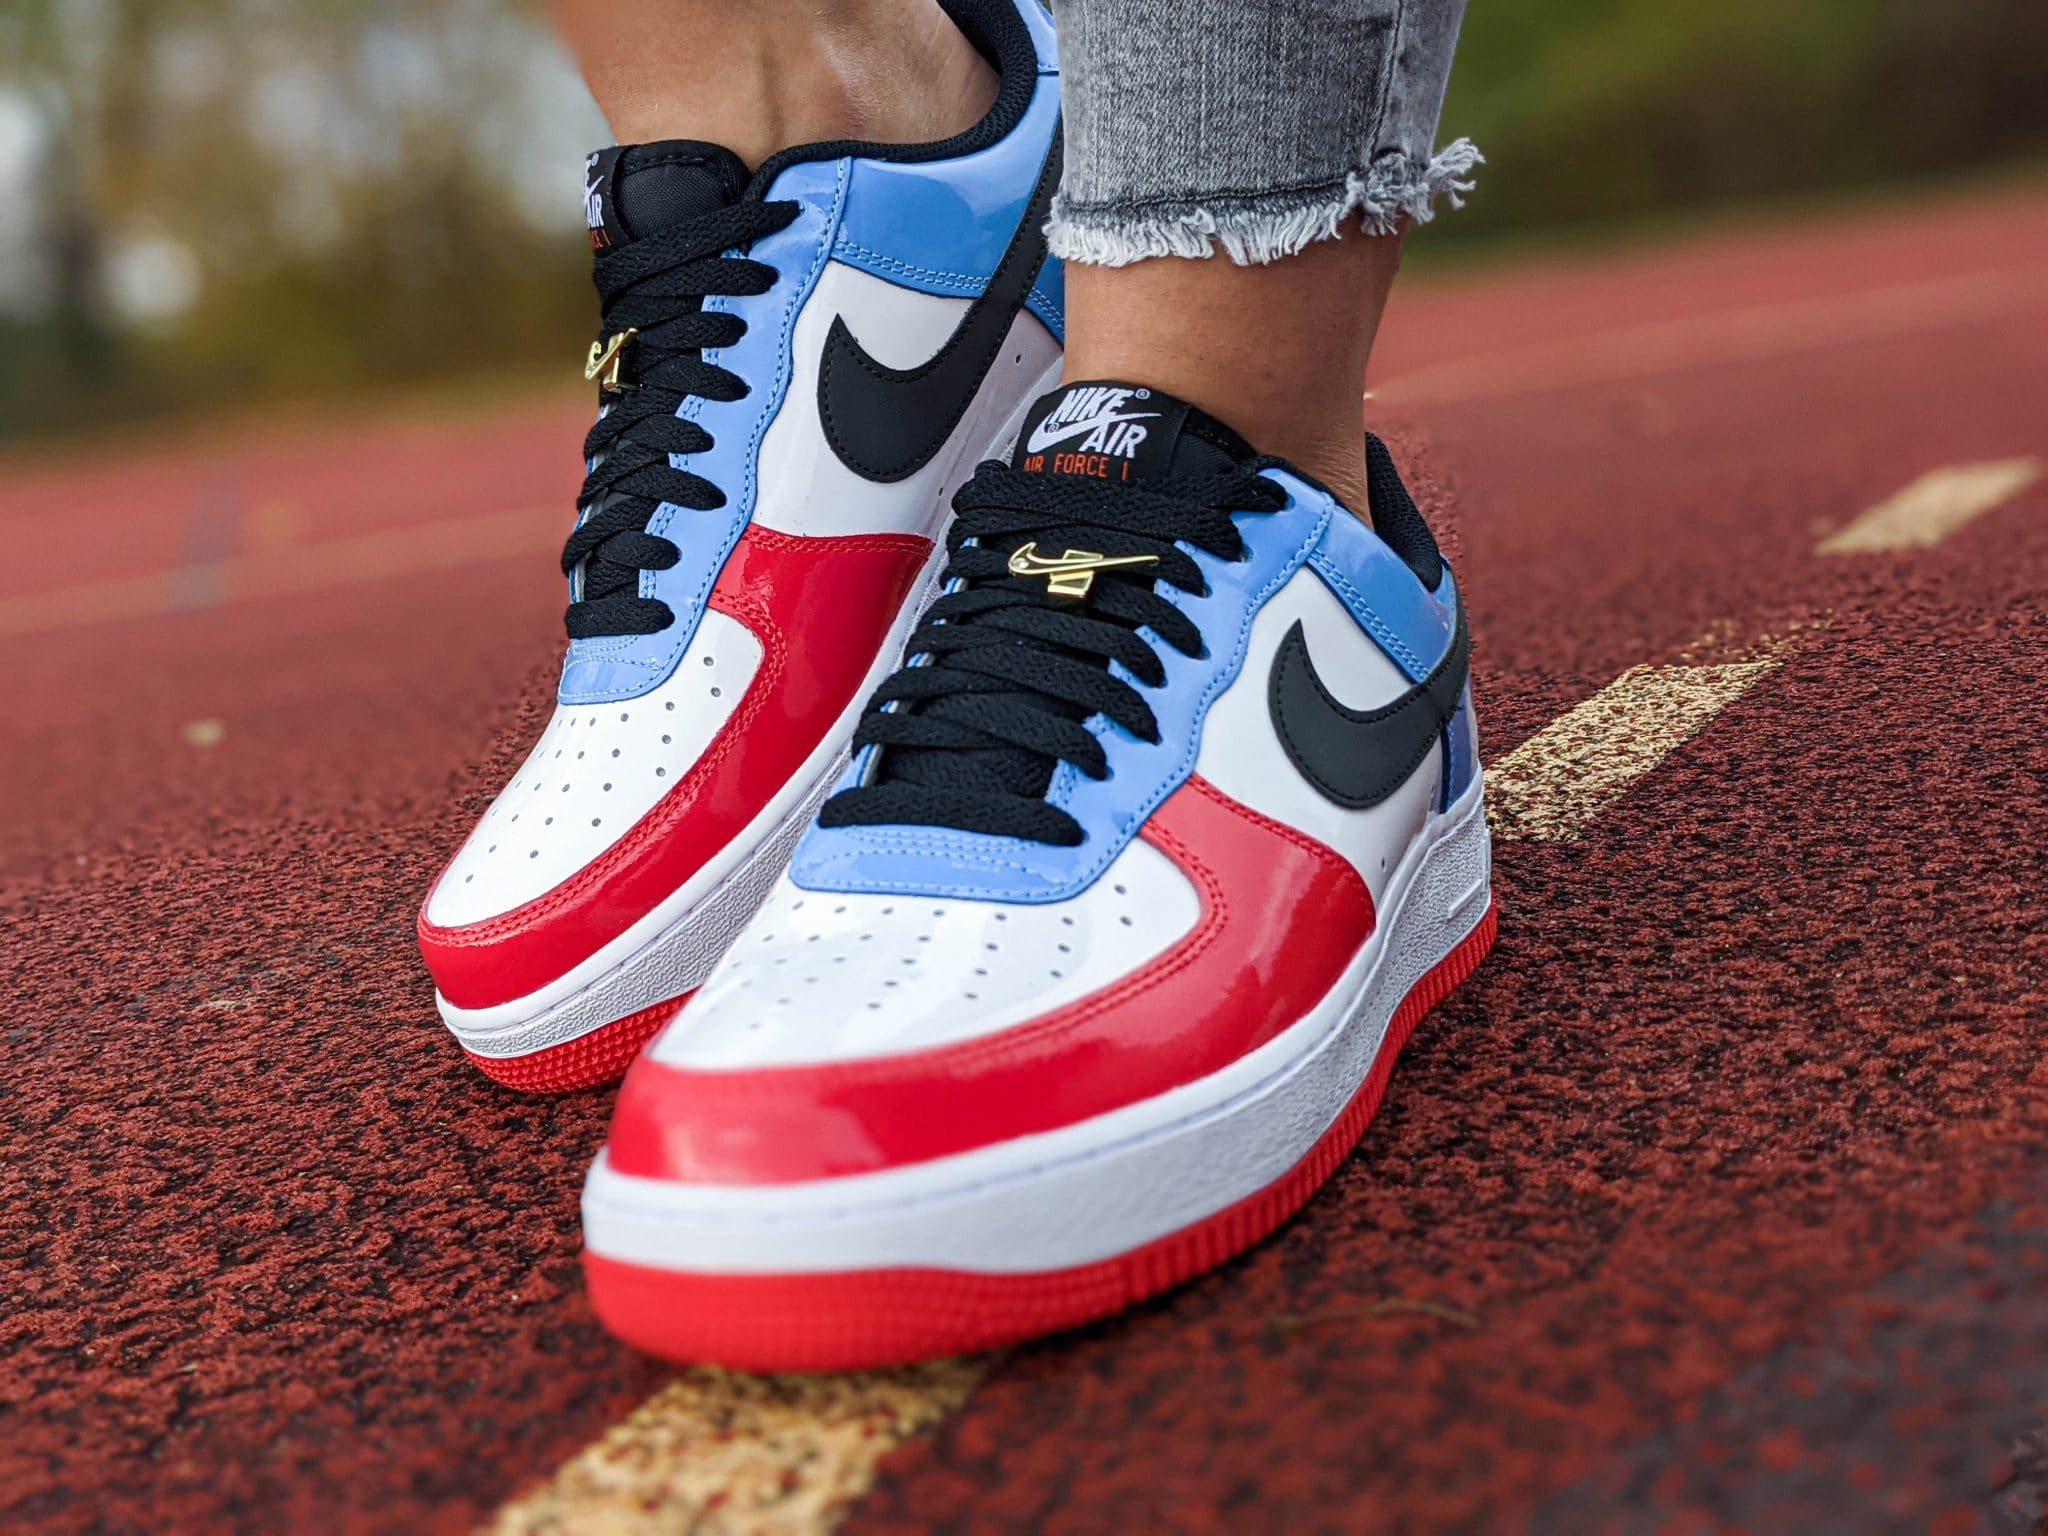 NIKENike Air Force 1 unlocked by you - 靴